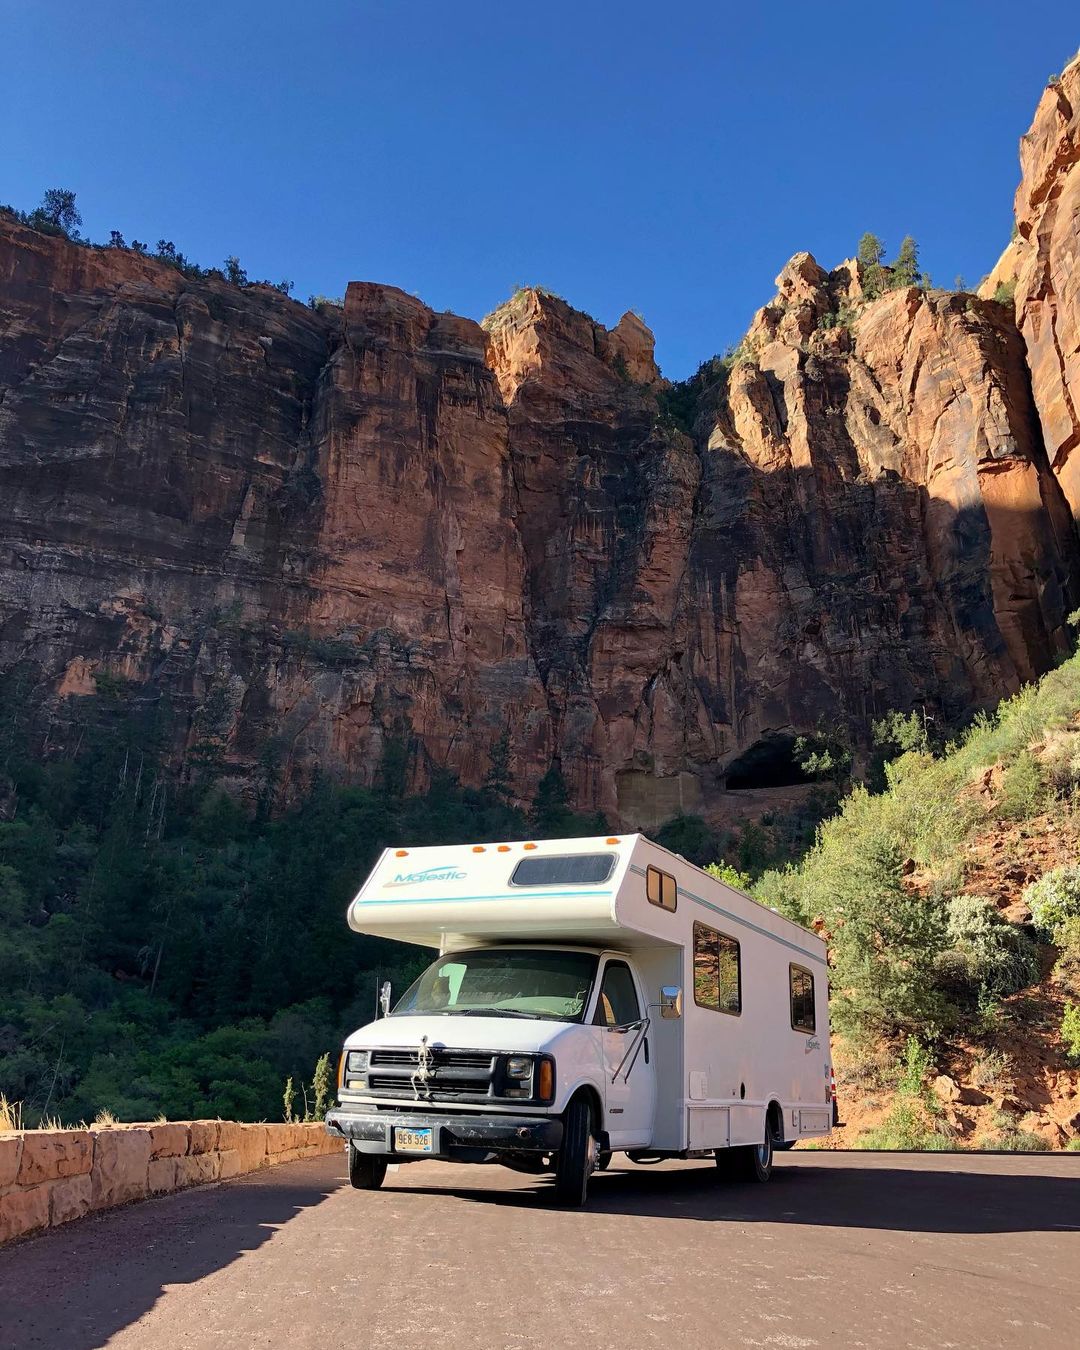 RV parked in Zion National Park. Photo by Instagram User @marv.themajestic